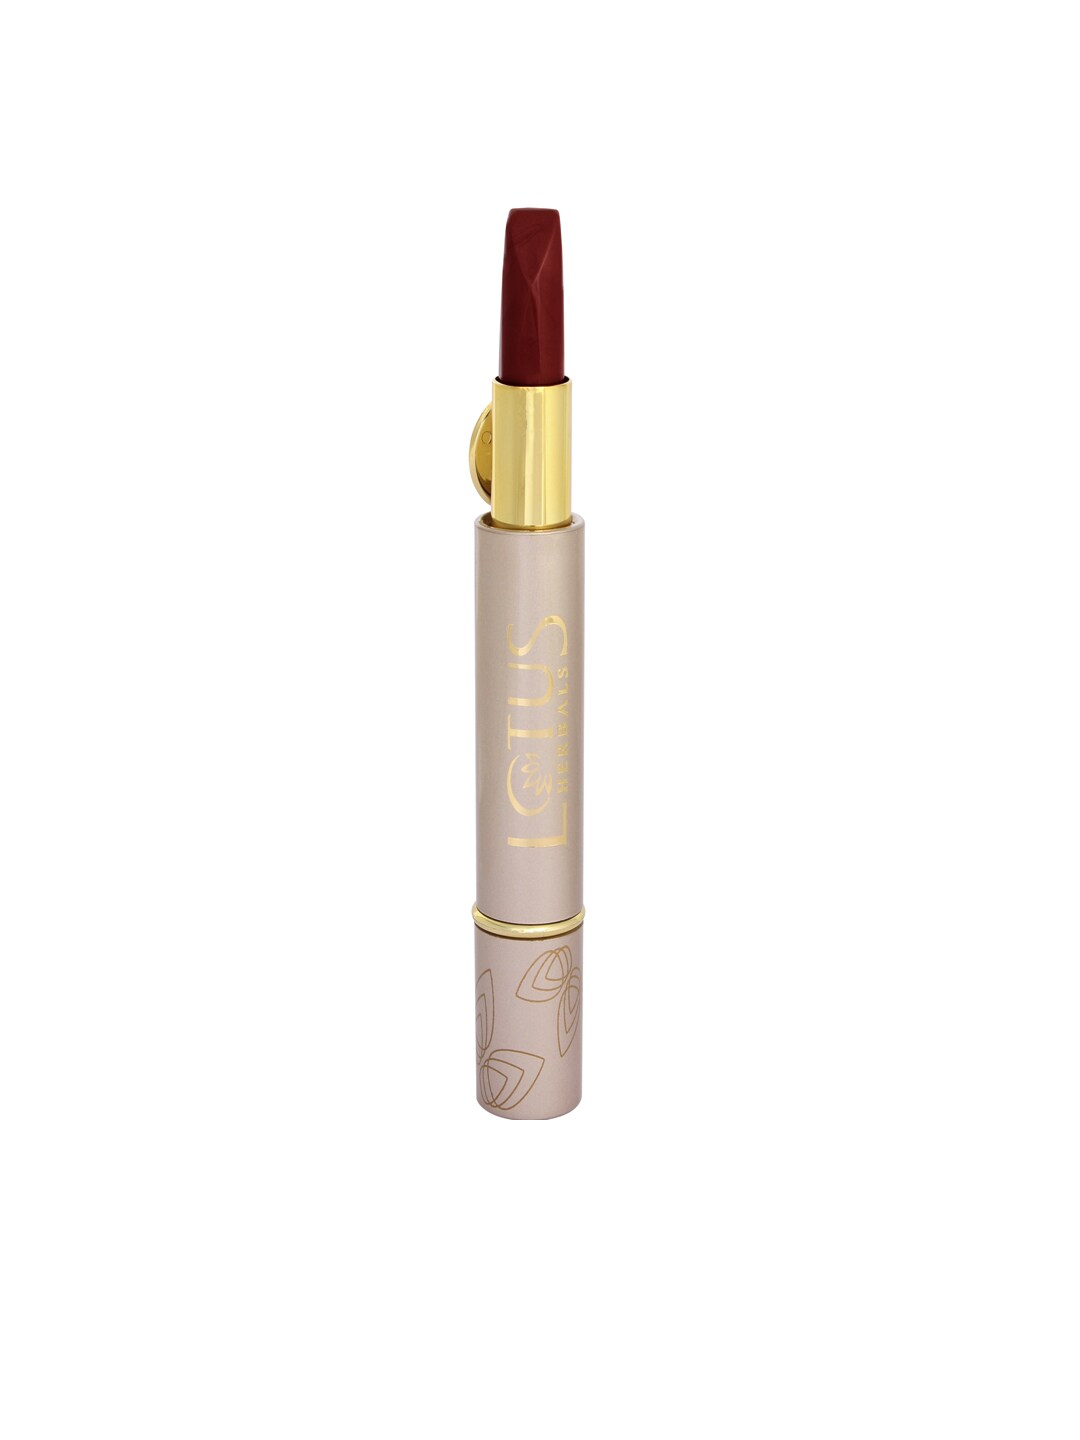 Lotus Herbals Floral Glam Apple Berry Lipstick 001